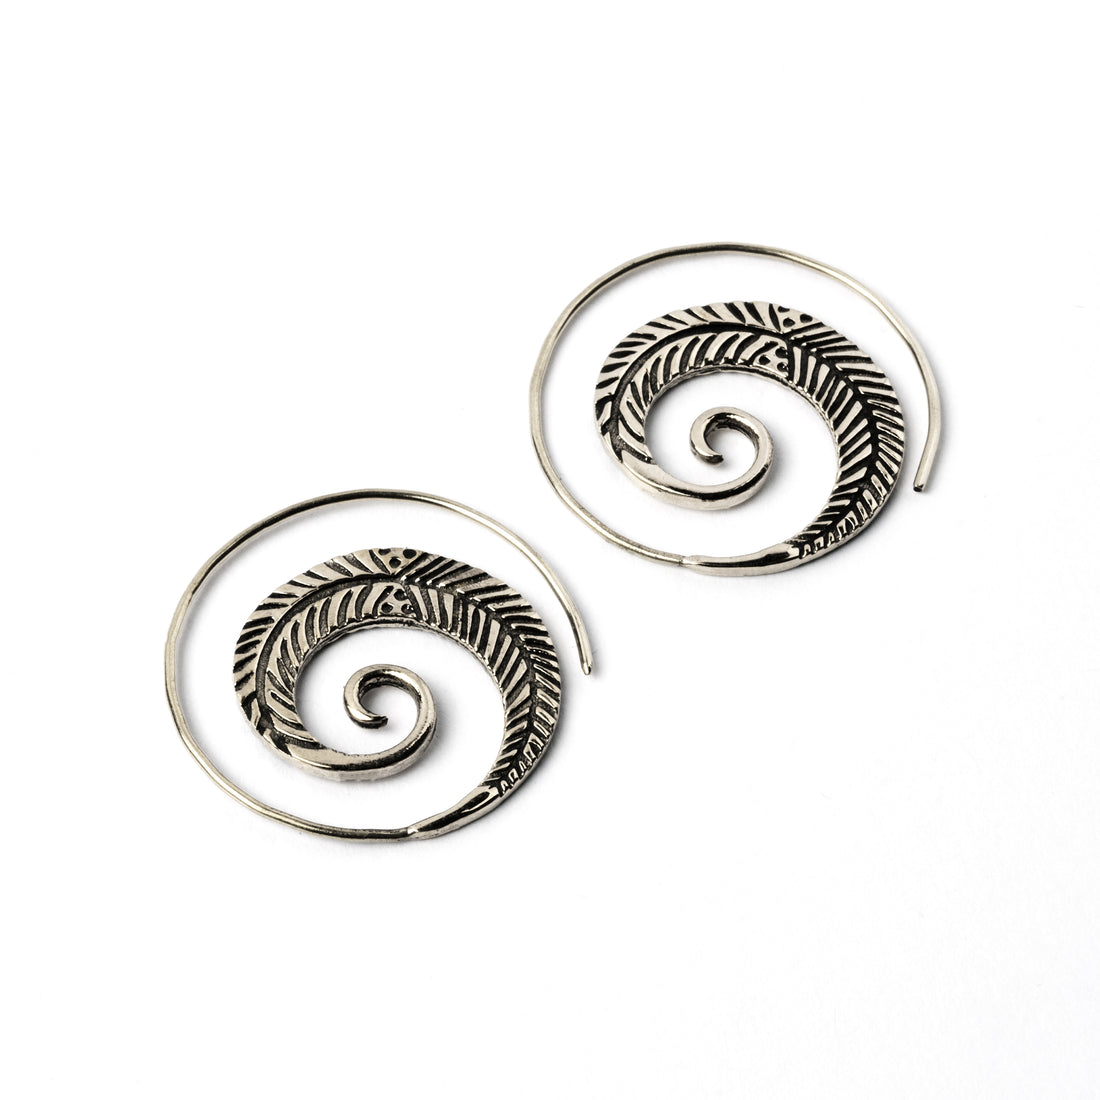 Spiral Feathers Tribal Silver Earrings frontal view